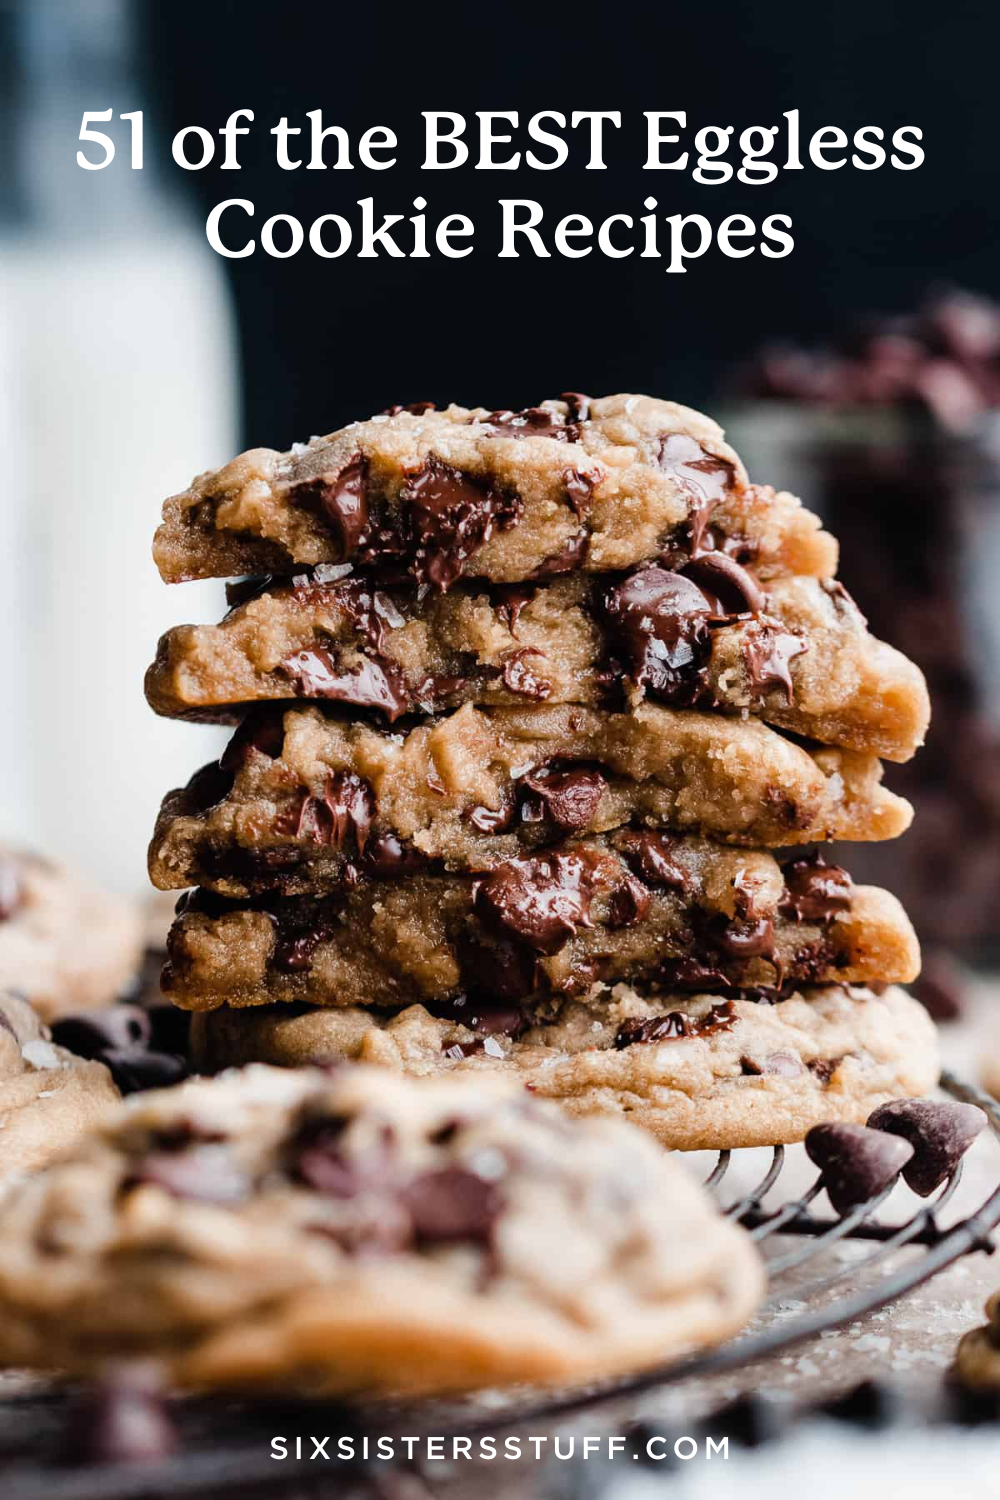 51 of the BEST Eggless Cookie Recipes